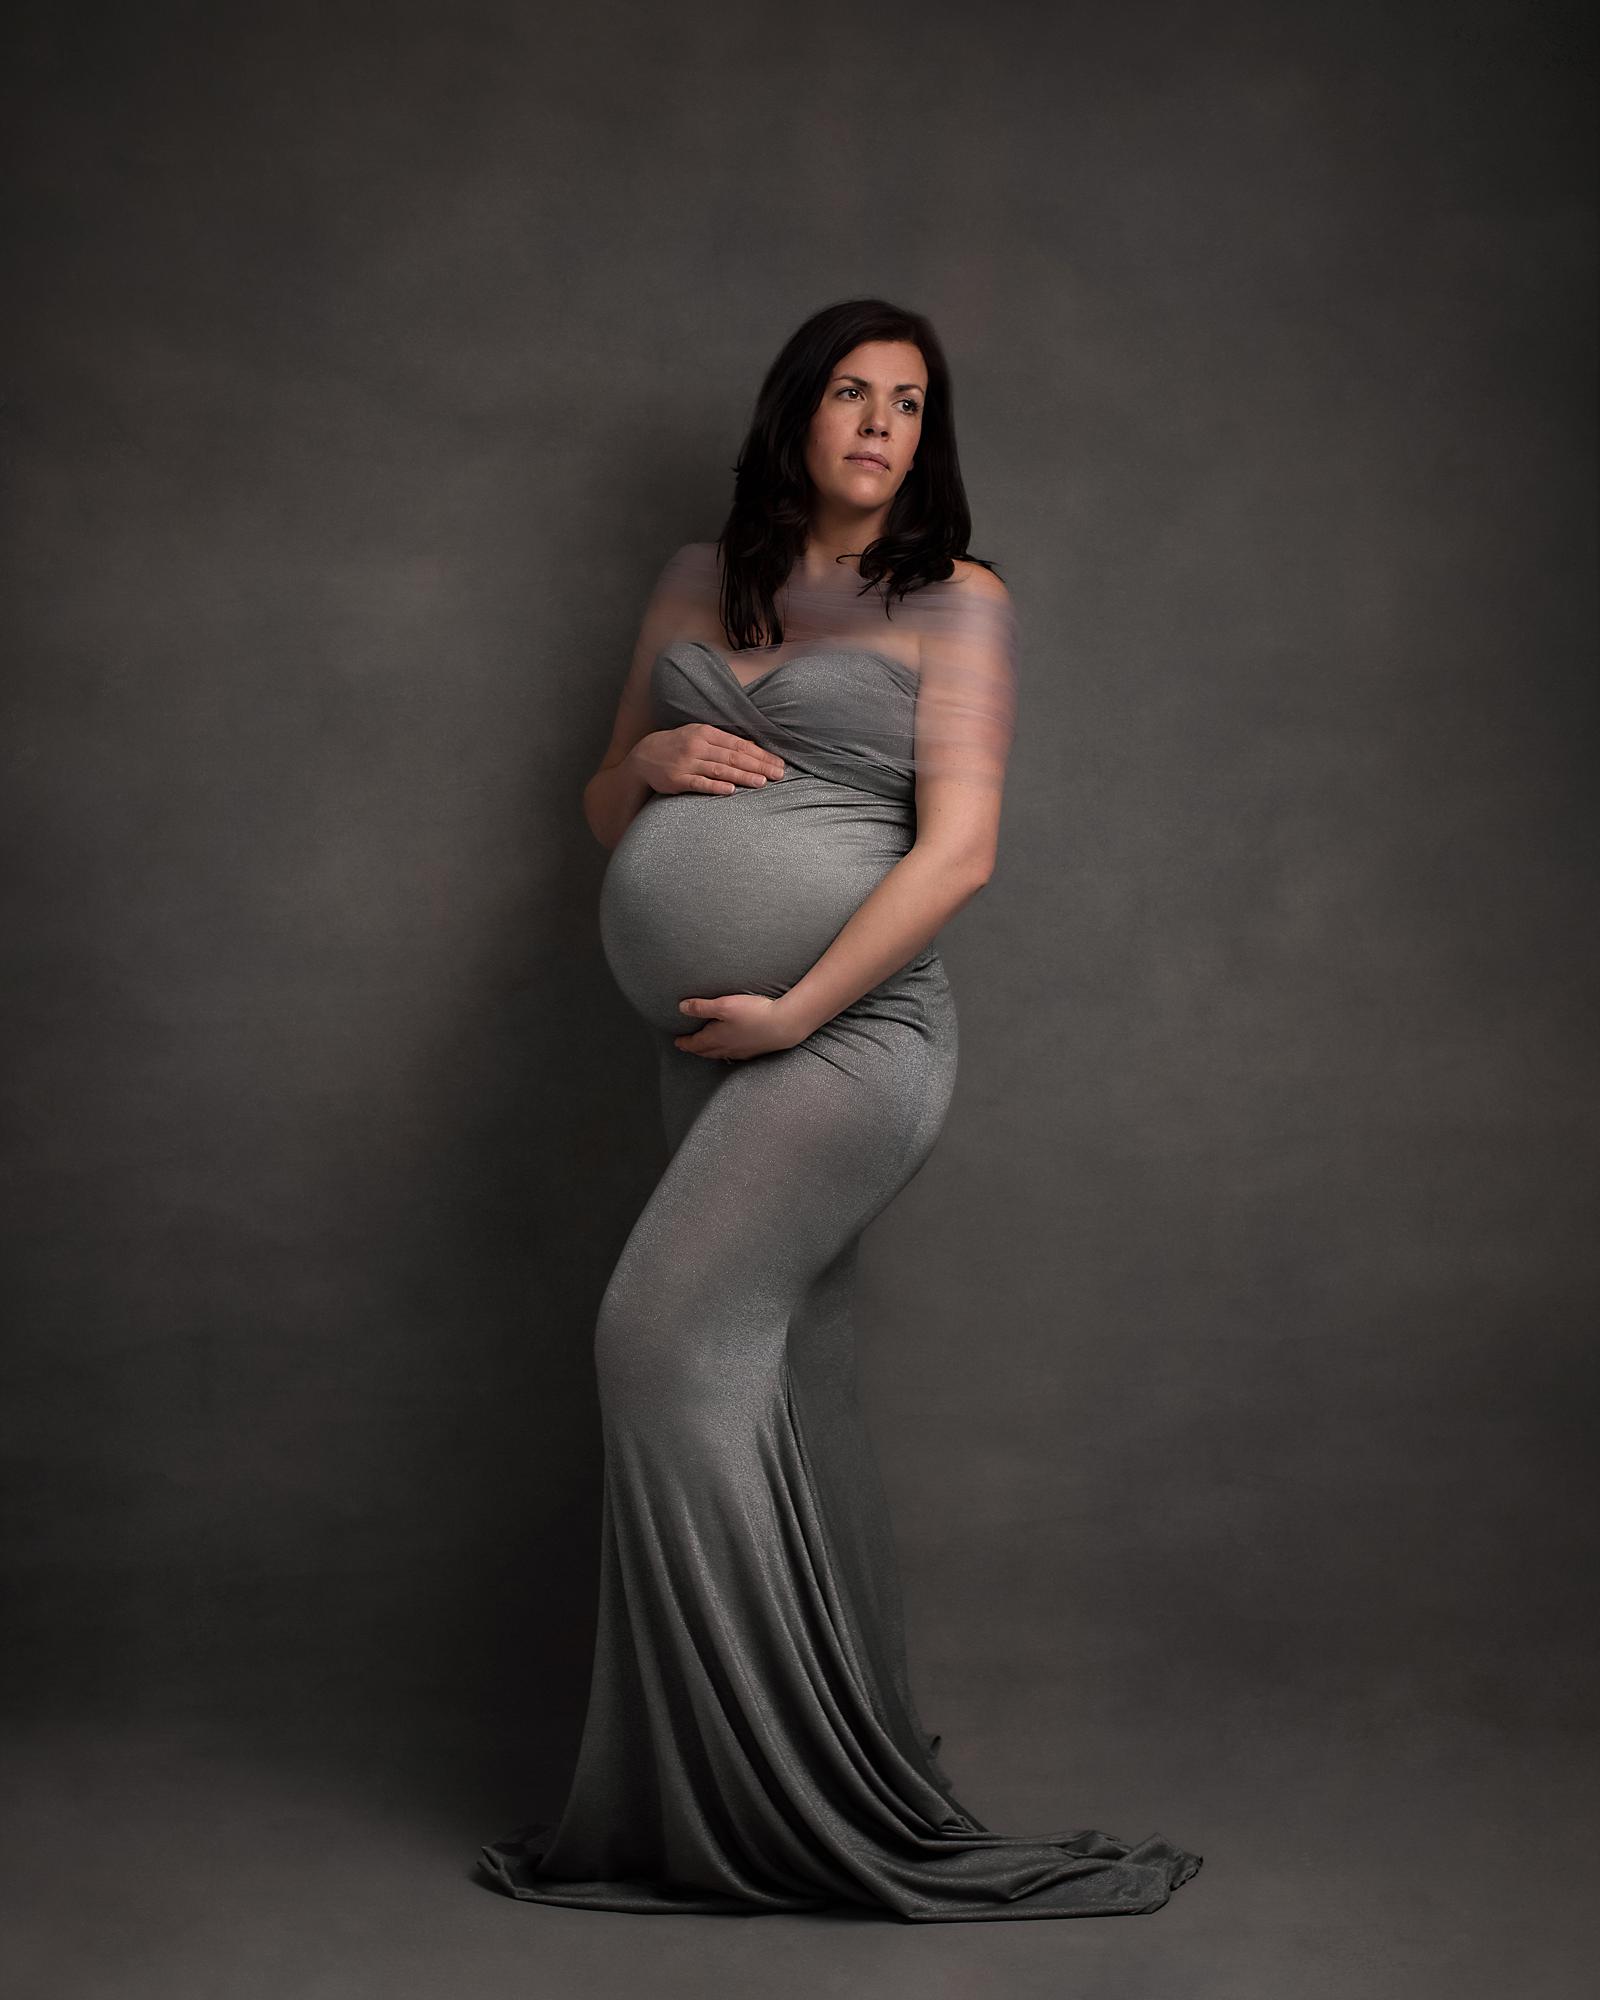 Pregnant woman posing in a grey dress against a grey backdrop for a maternity photoshoot in Suffolk